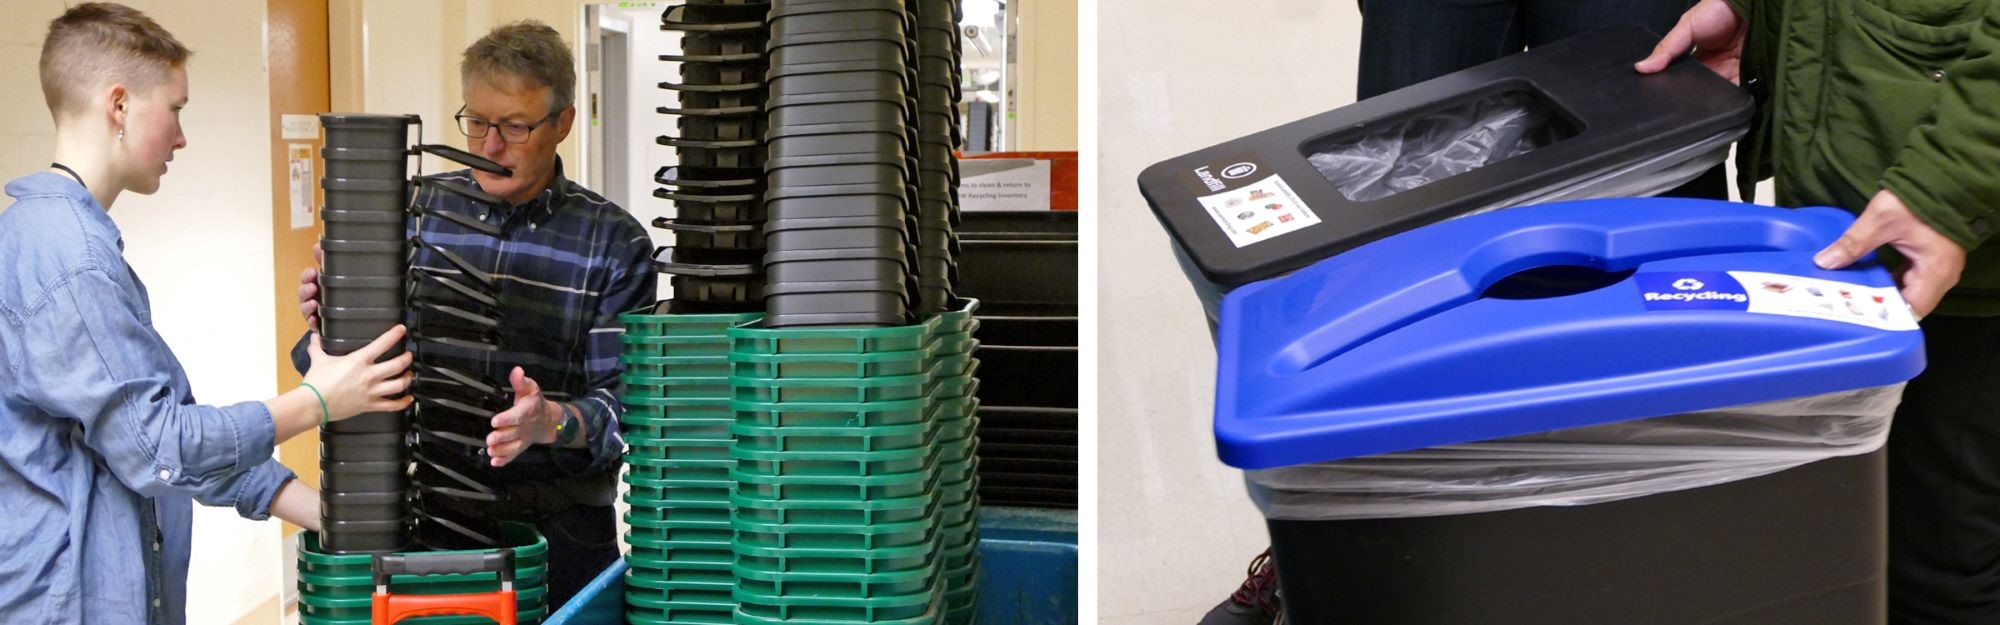 Left: two people with  stacks of MiniMax bins; Right: standard waste and recycle bins